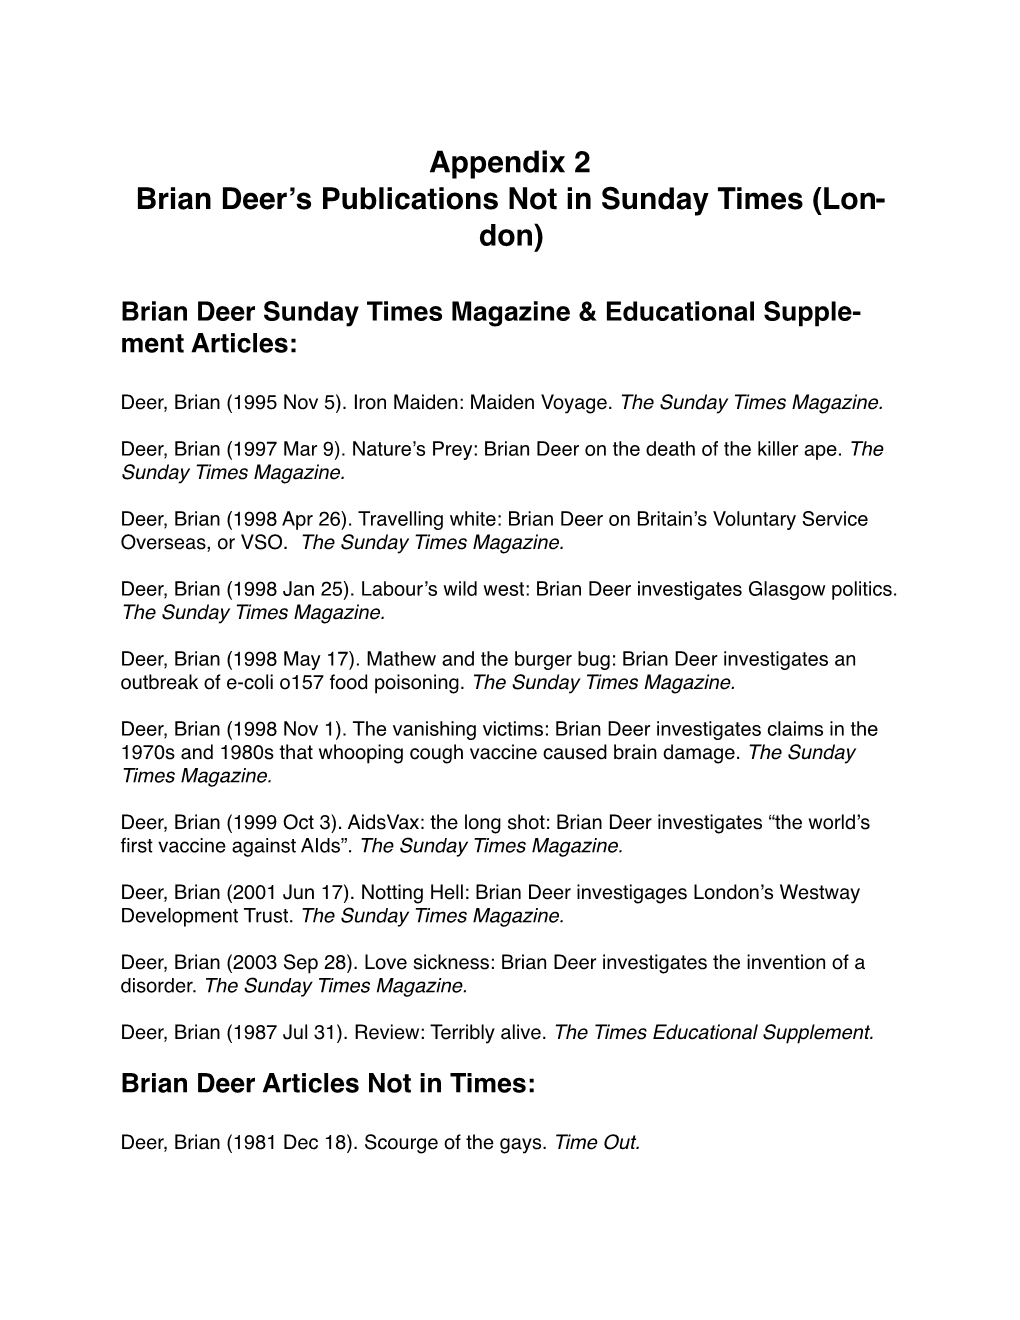 Brian Deer's Publications Not in Sunday Times